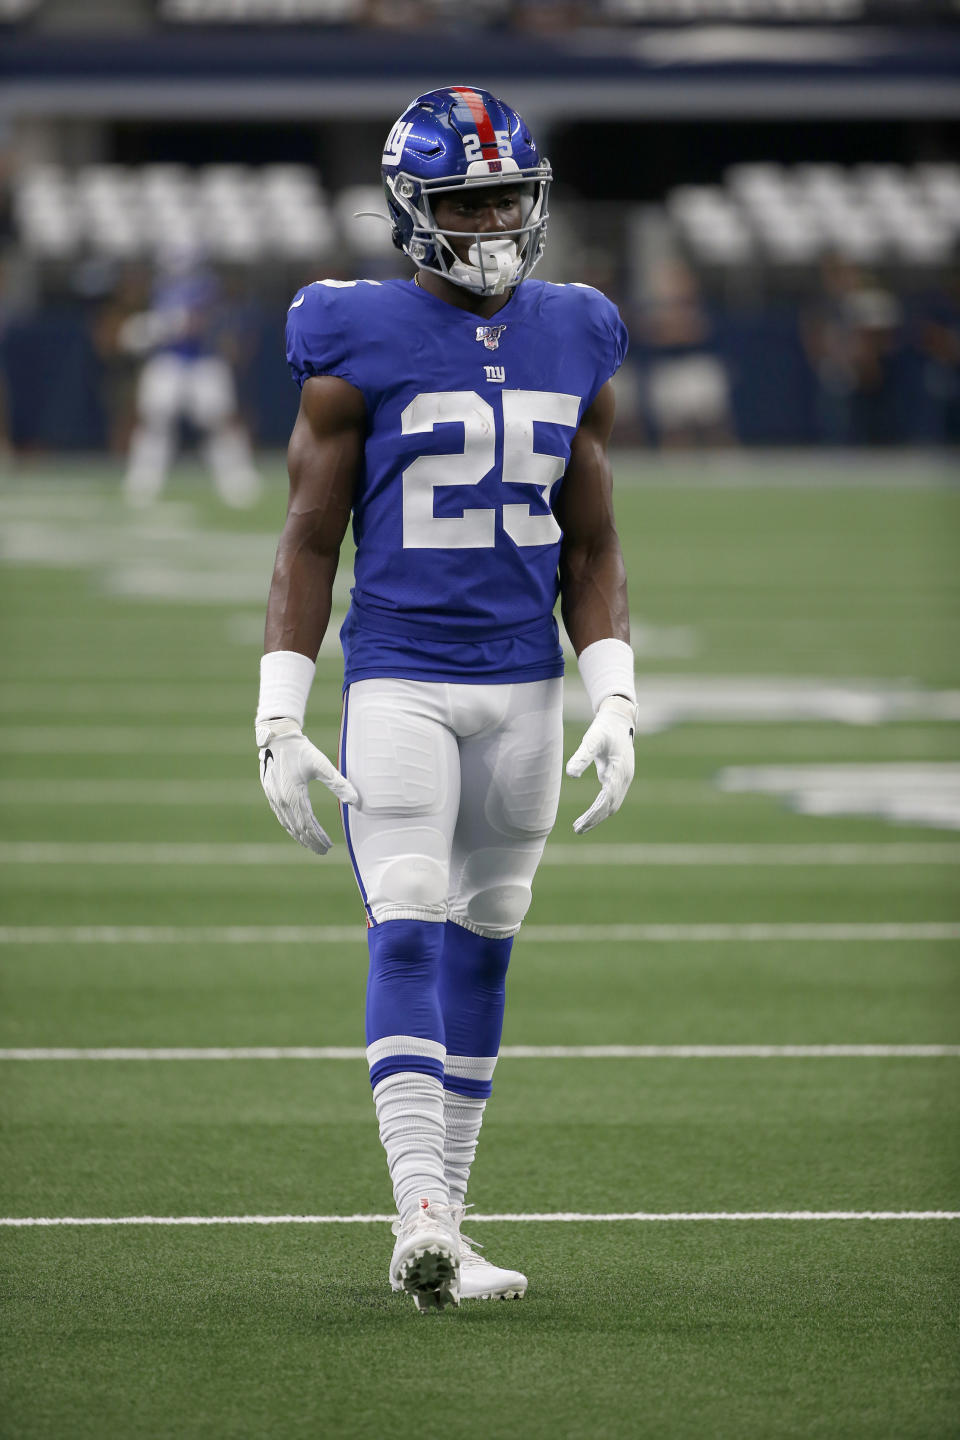 FILE - In this Sunday, Sept. 8, 2019 file photo, New York Giants defensive back Corey Ballentine (25) warms up before a NFL football game against the Dallas Cowboys in Arlington, Texas. A day after making his NFL debut with the New York Giants, Ballentine testified at a preliminary hearing about the day his best friend and former Washburn University teammate Dwane Simmons was shot to death. (AP Photo/Ron Jenkins, File)